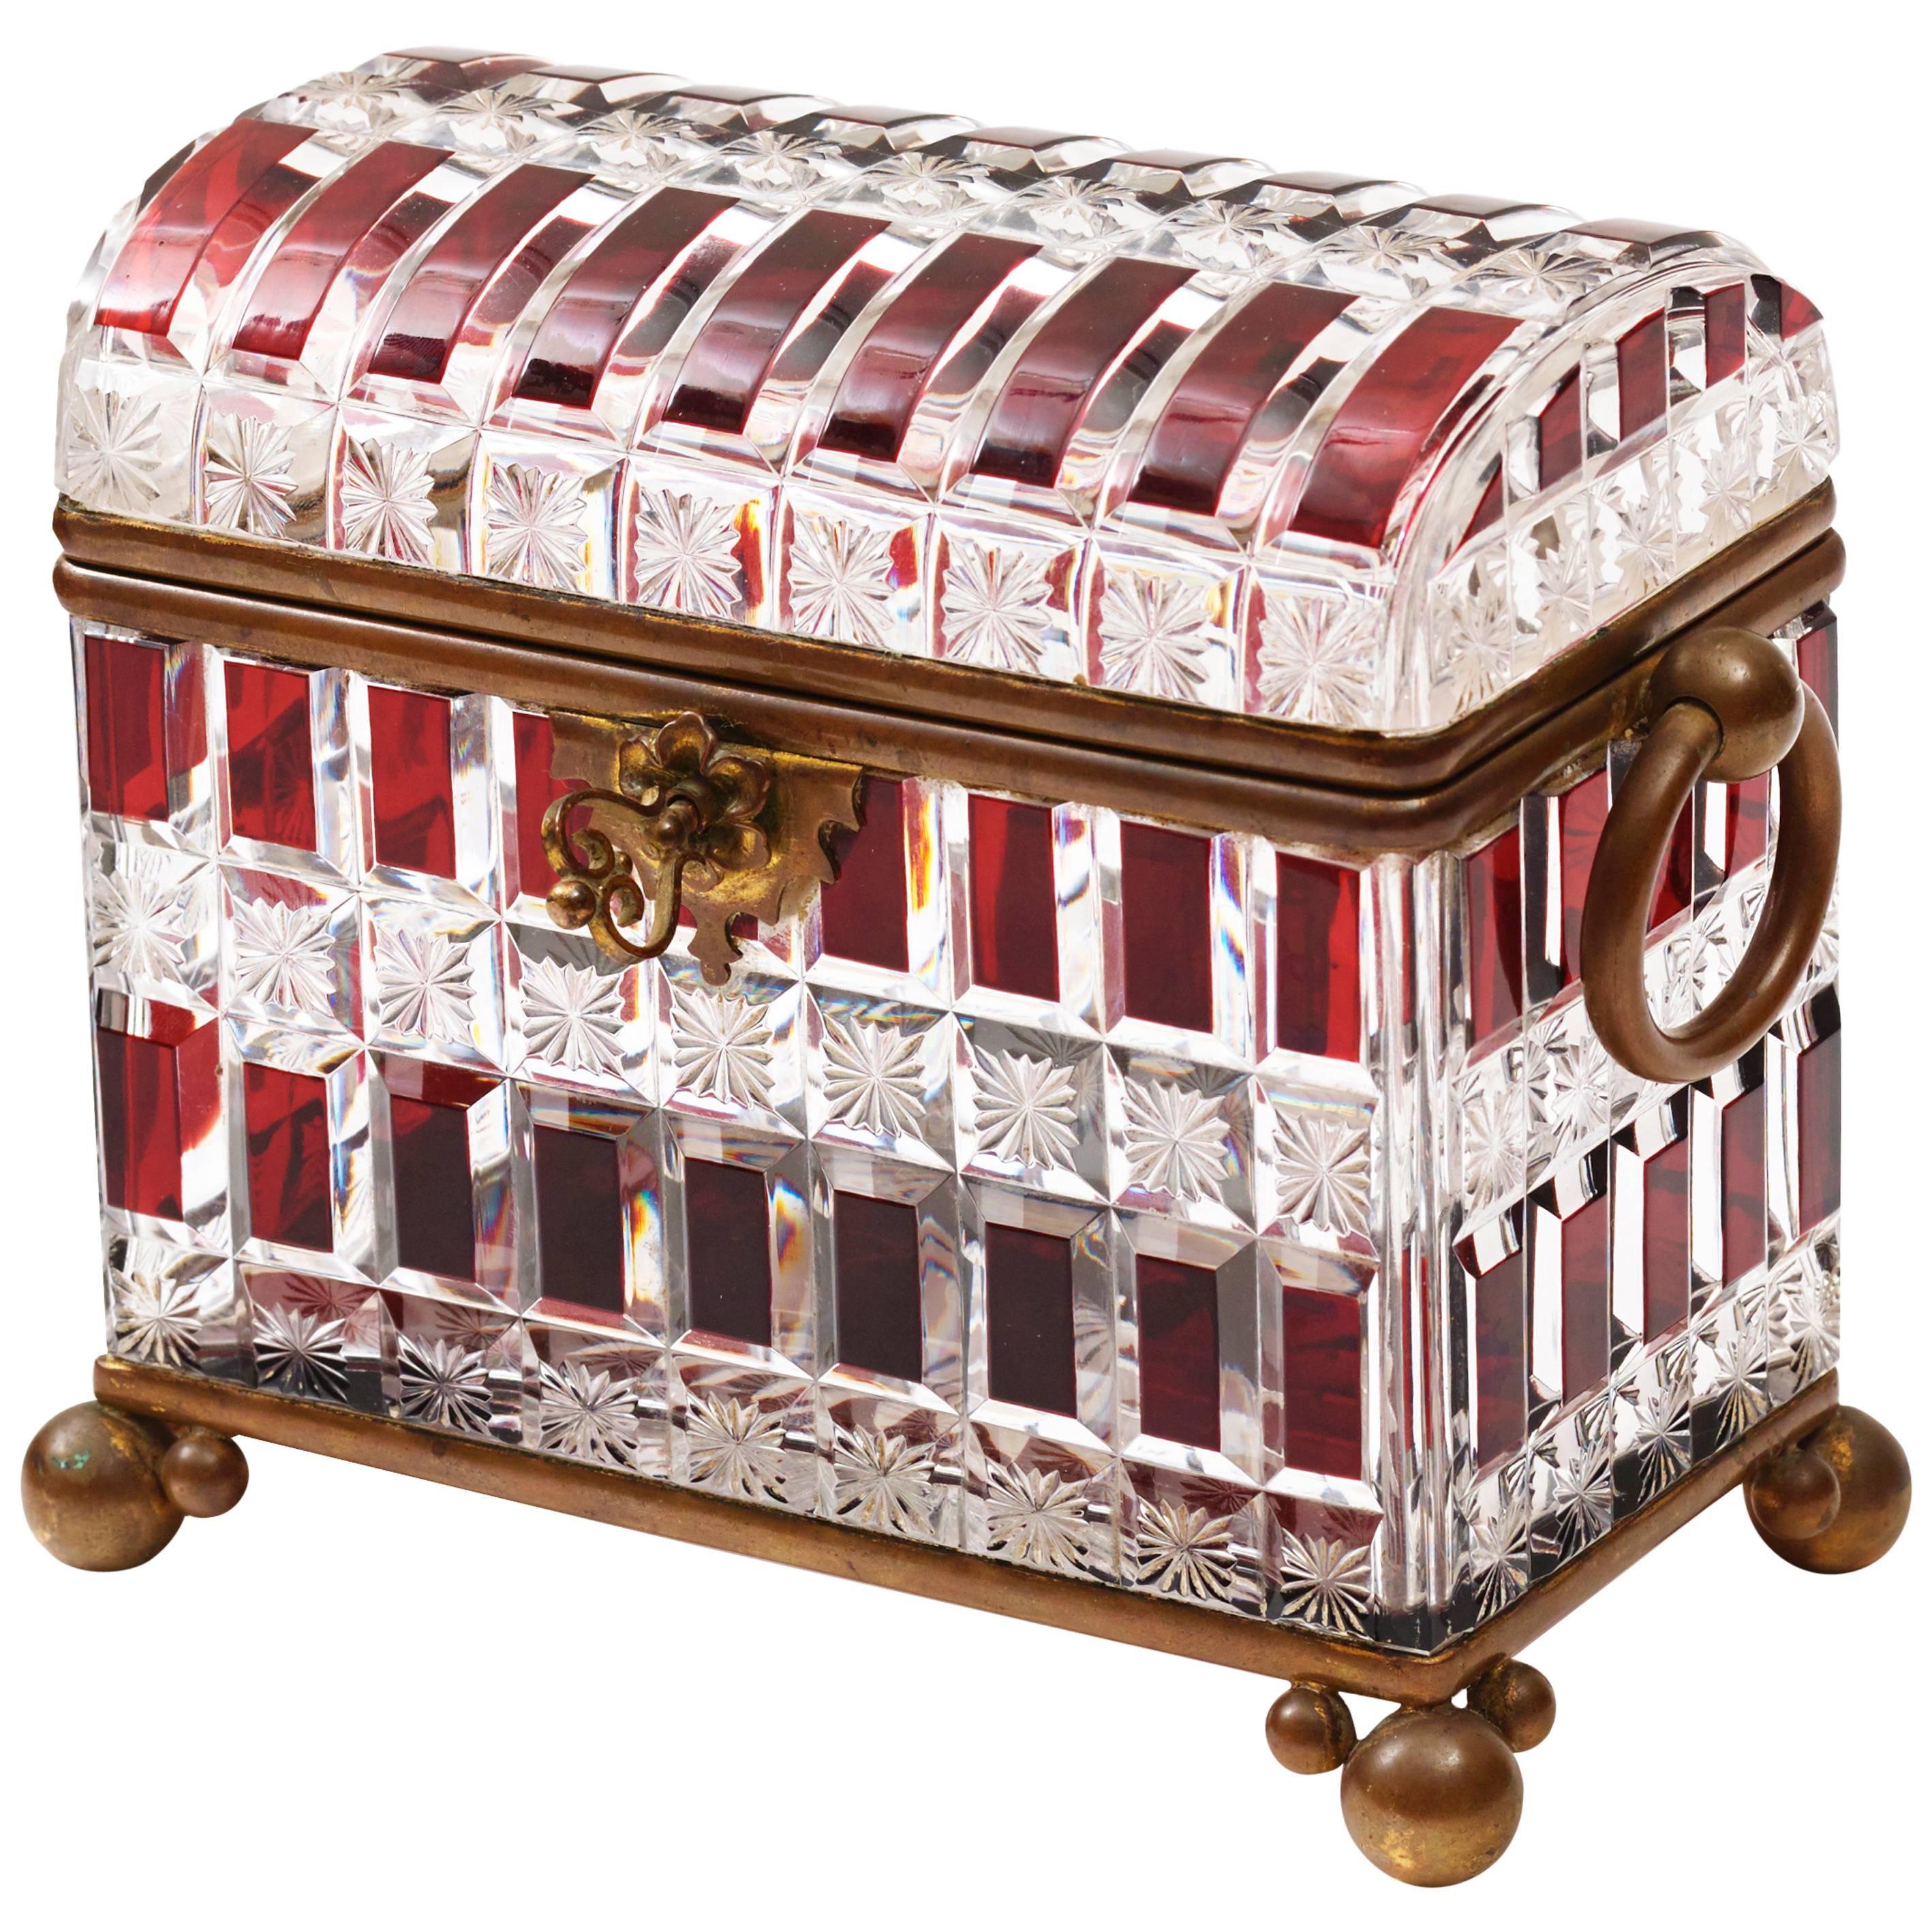 Large Maison Siraudin Red Overlay Glass Casket, France, circa 1890